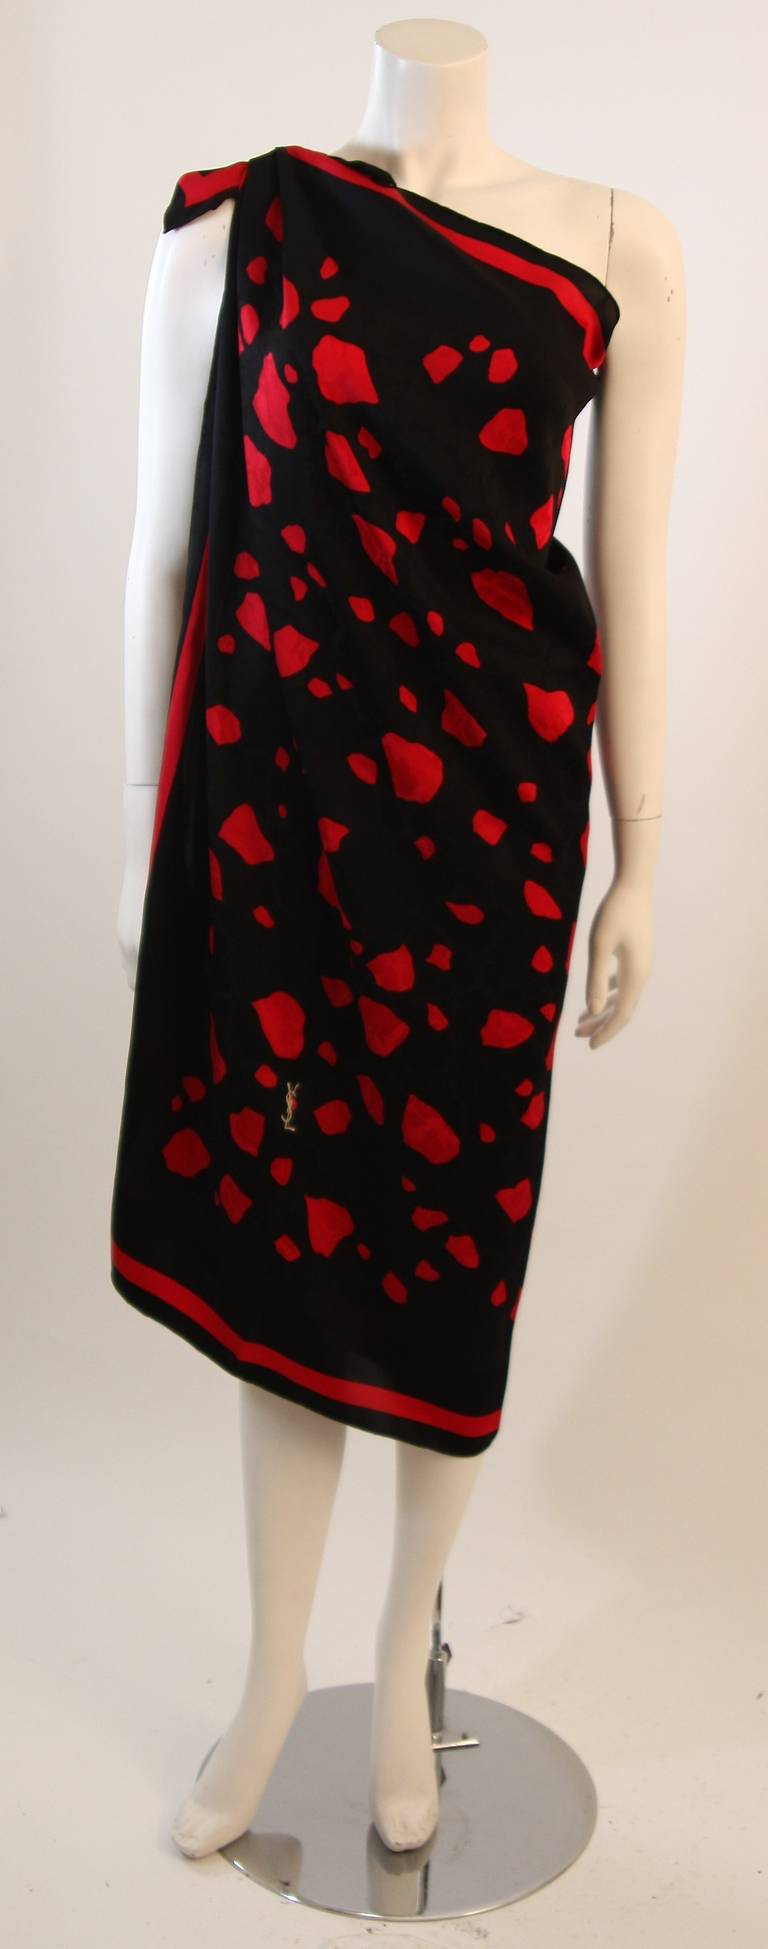 This is a wonderful generously sized Yves St. Laurent scarf or shawl. It is composed of a beautiful silk with stunning black and red contrast print. Made in France.

Measures (Approximately)
46